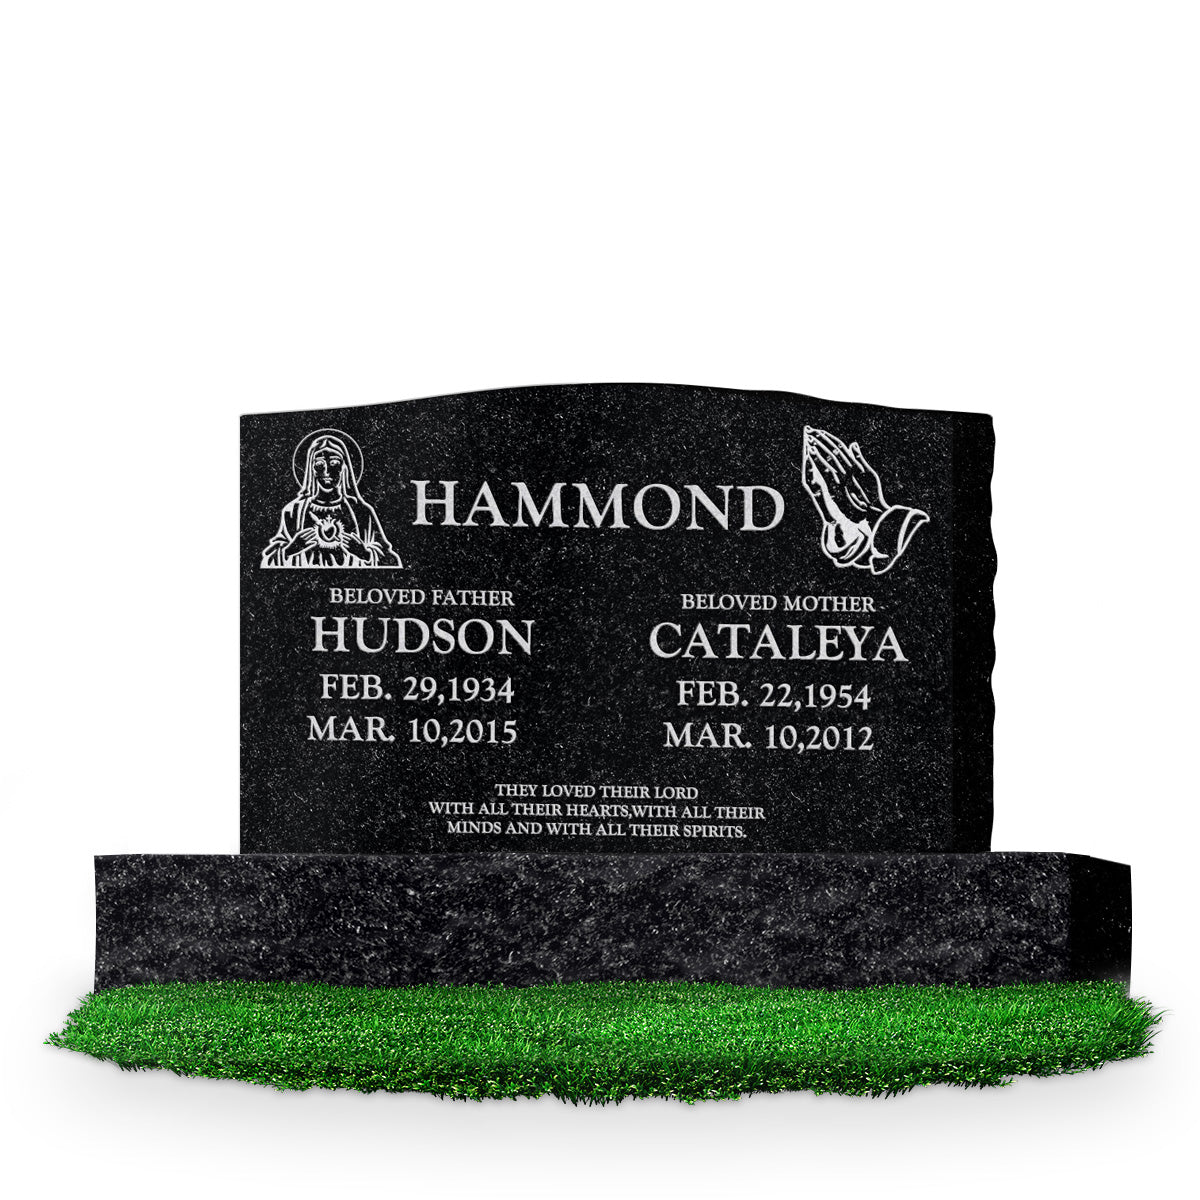 36″ x 6″ x 24″ Serp Top Upright Headstone: polished front and back;  48″ base; Companion/Artwork